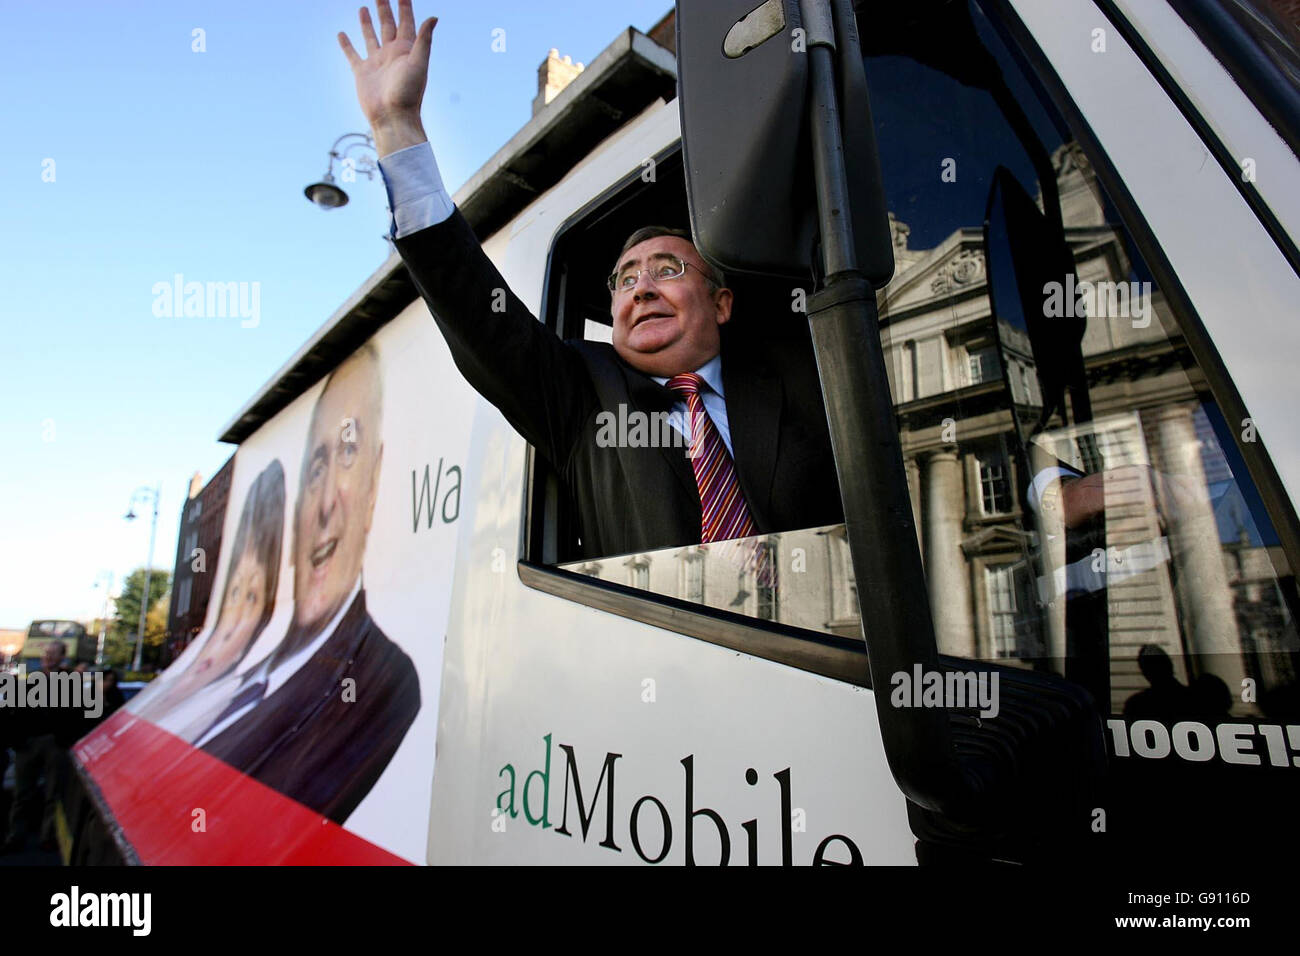 Labour Party Leader Pat Rabbitte in Labour's new public admobile outside Government Buildings,Dublin Tuesday November 1 2005. It is a mobile display featuring pictures of the Taoiseach Bertie Ahern and Tanaiste Mary Harney beside the single word 'wasters.' as the party stepped up the pressure over expensive public projects which have failed to deliver services. See PA story POLITICS Waste. PRESS ASSOCIATION Photo. Photo credit should read: Julien Behal/PA Stock Photo